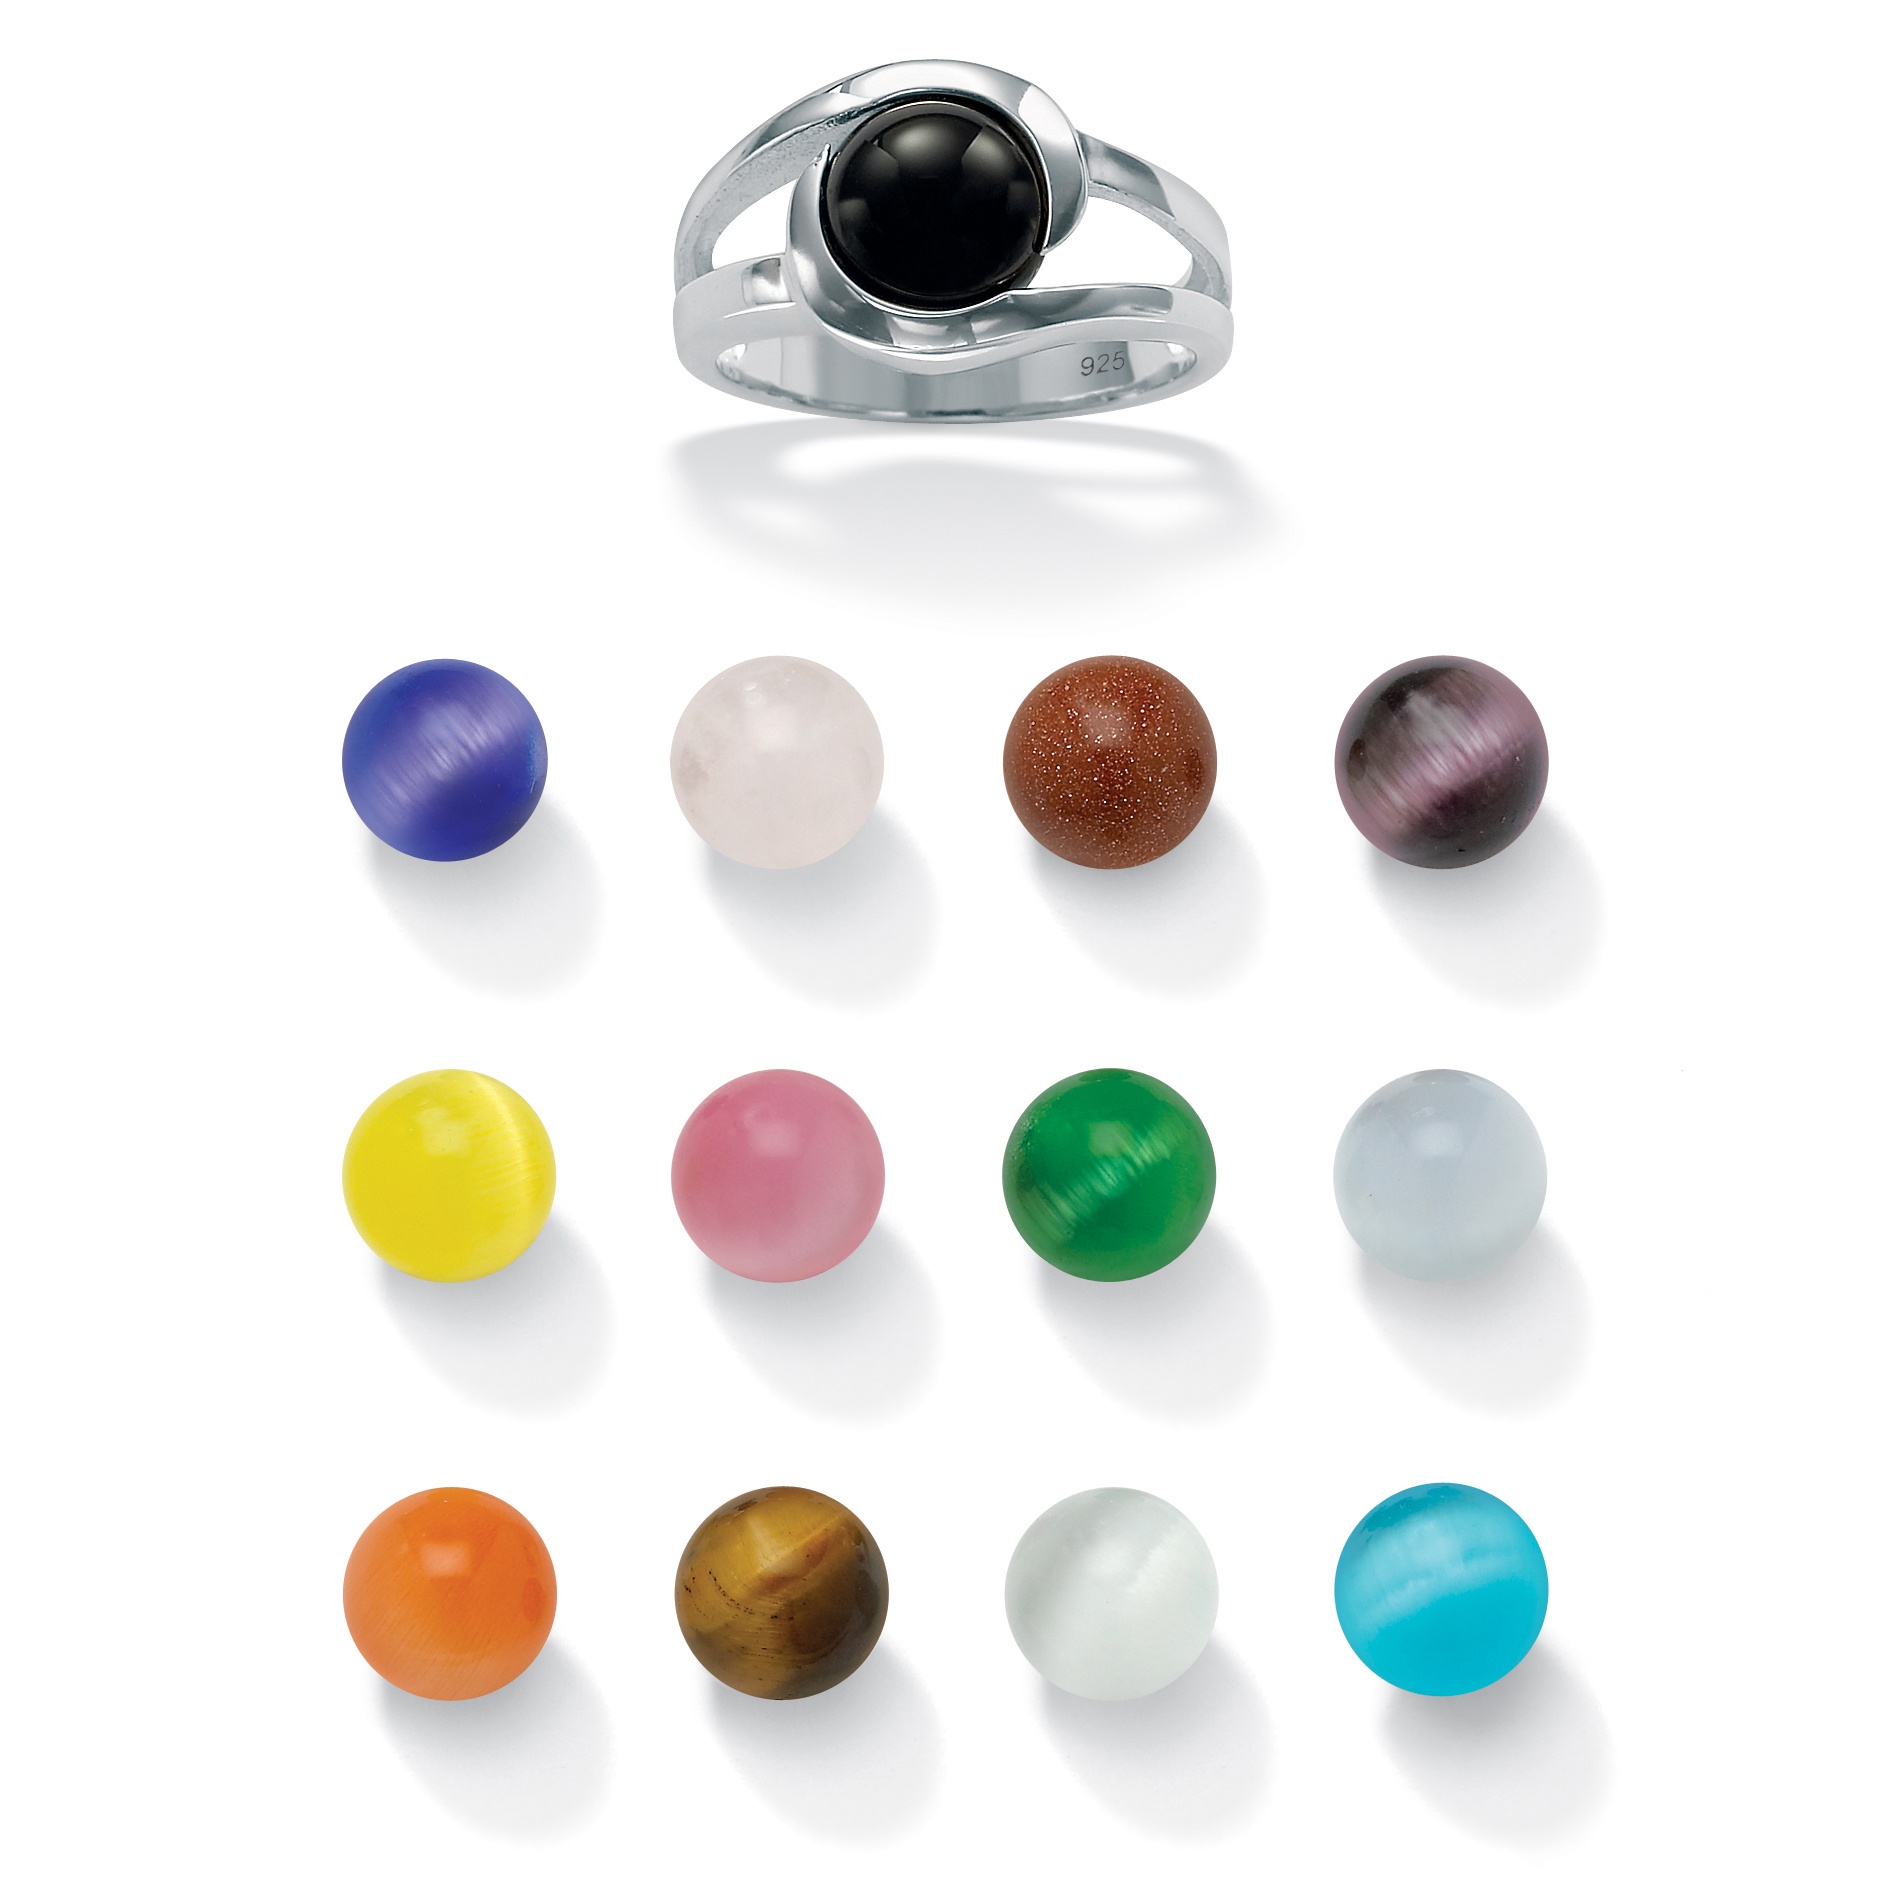 14Piece Interchangeable Ring Set with Genuine and Simulated Stones in